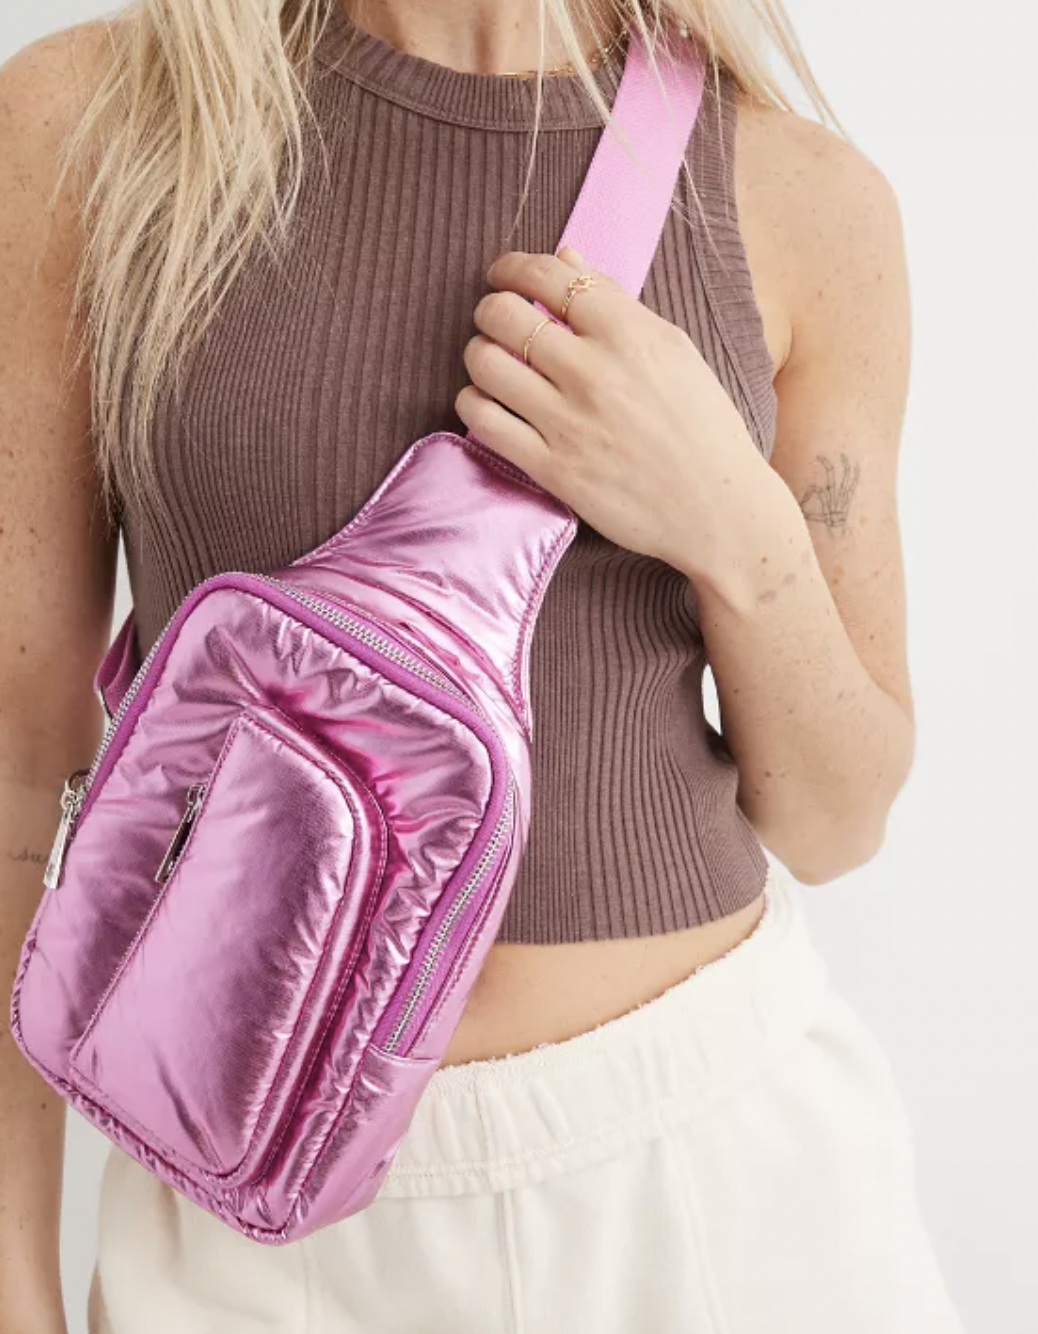 A model wearing the bag in pink